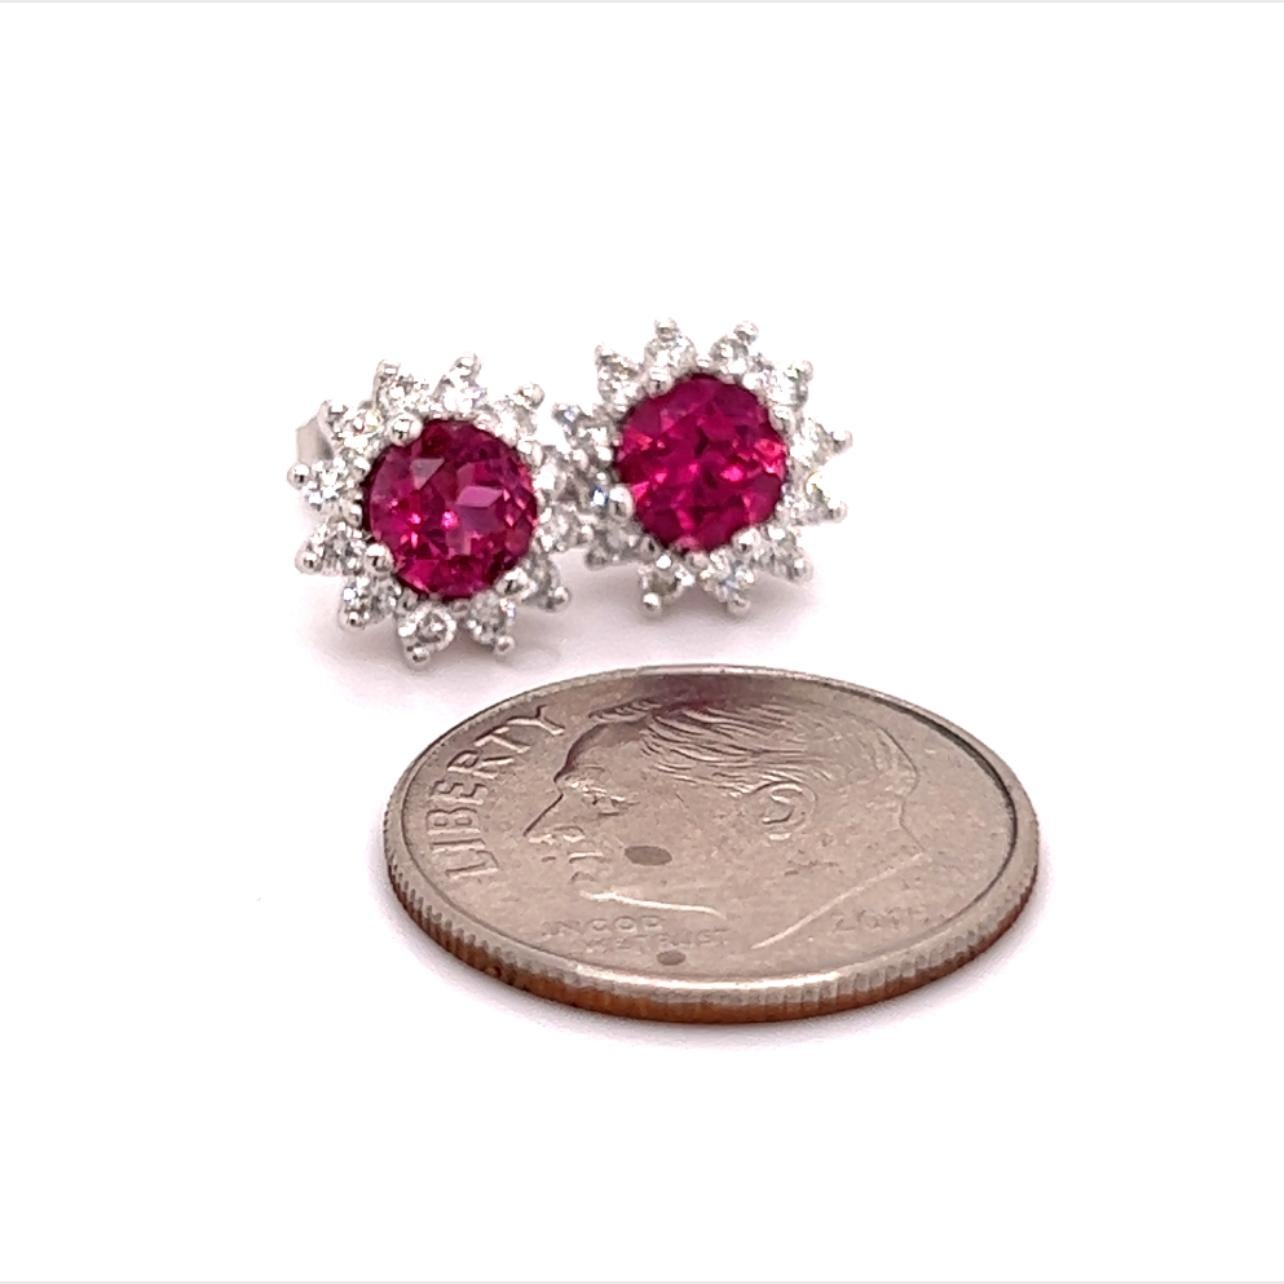 Diamond Rubellite Tourmaline Earrings 14k Gold 1.36 Tcw Certified In New Condition For Sale In Brooklyn, NY